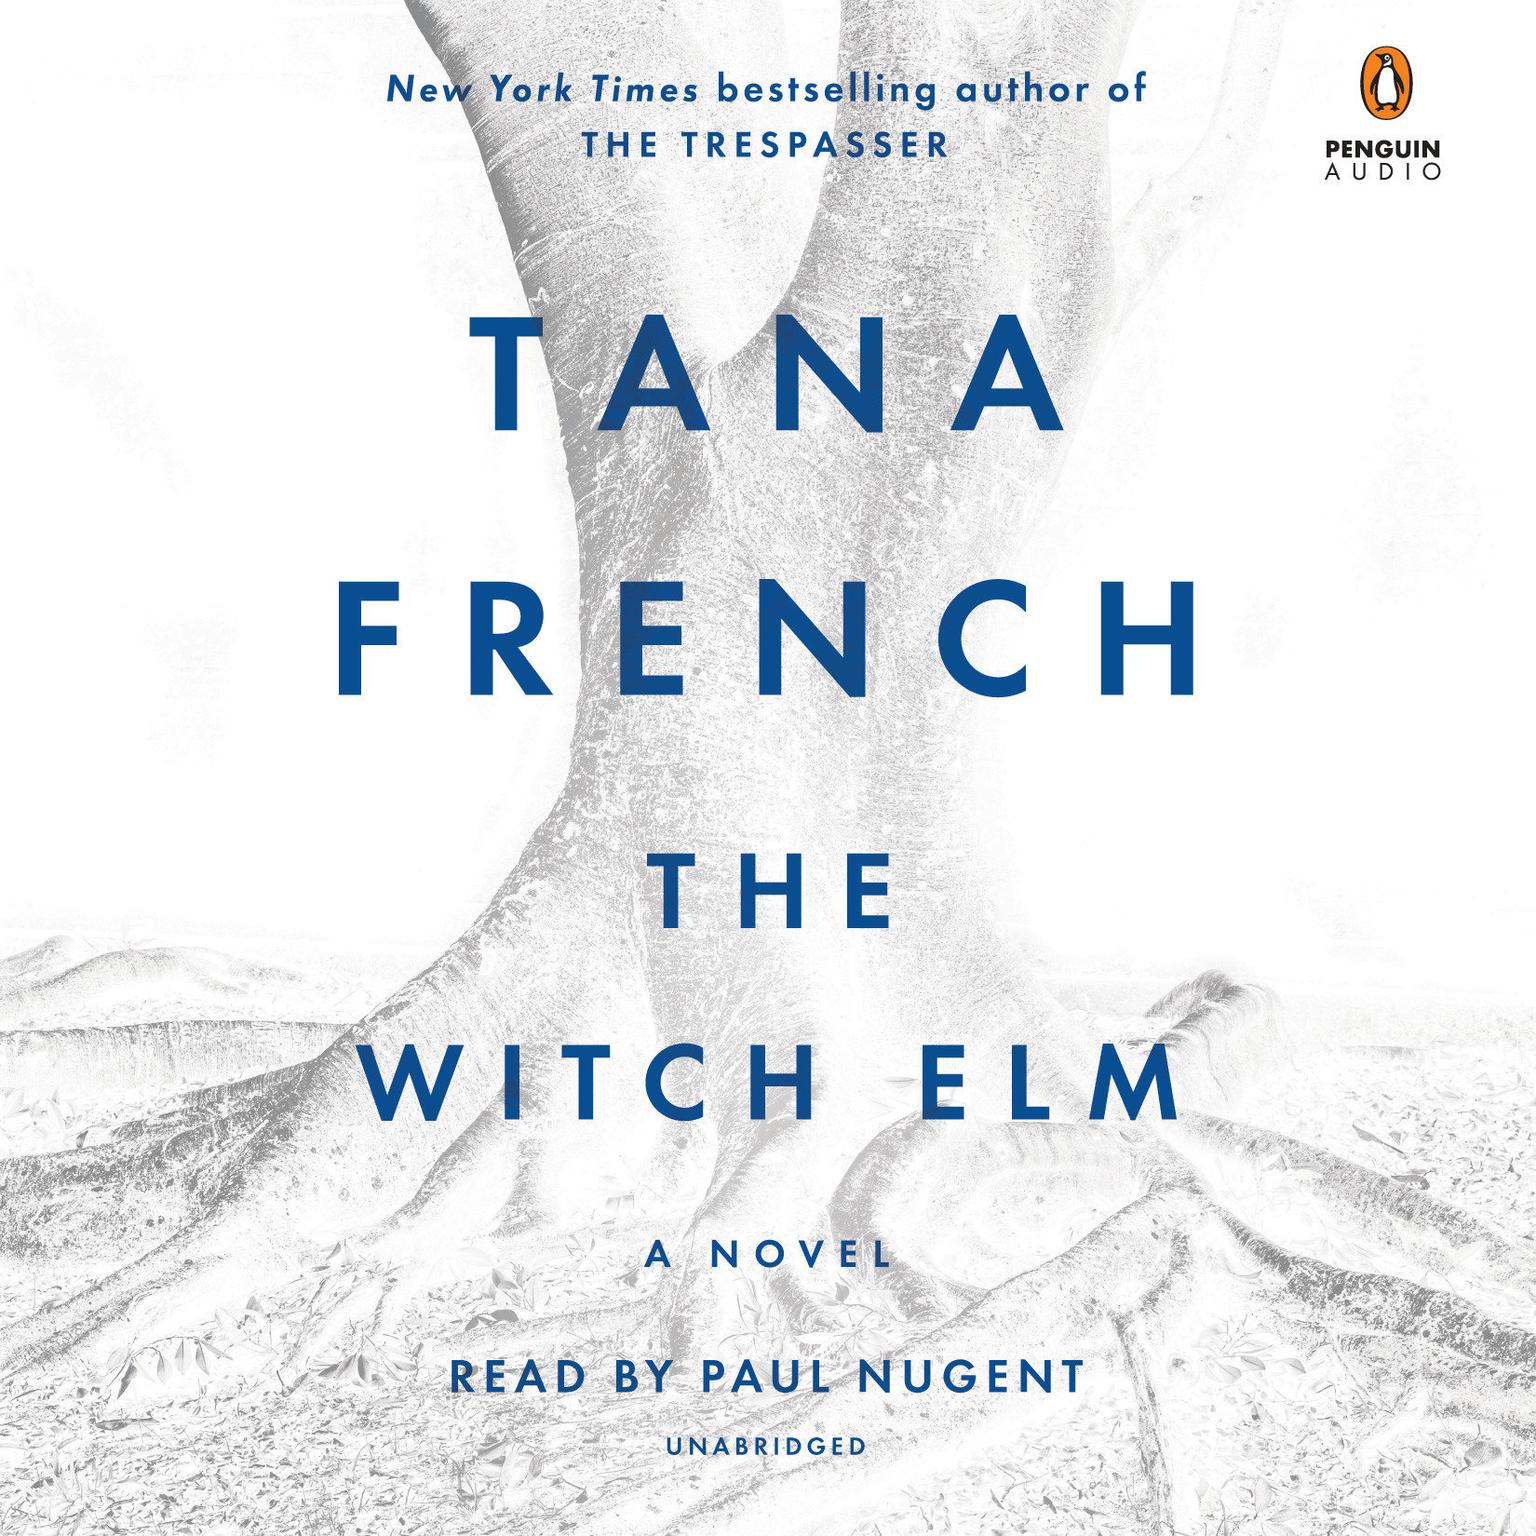 The Witch Elm: A Novel Audiobook, by Tana French